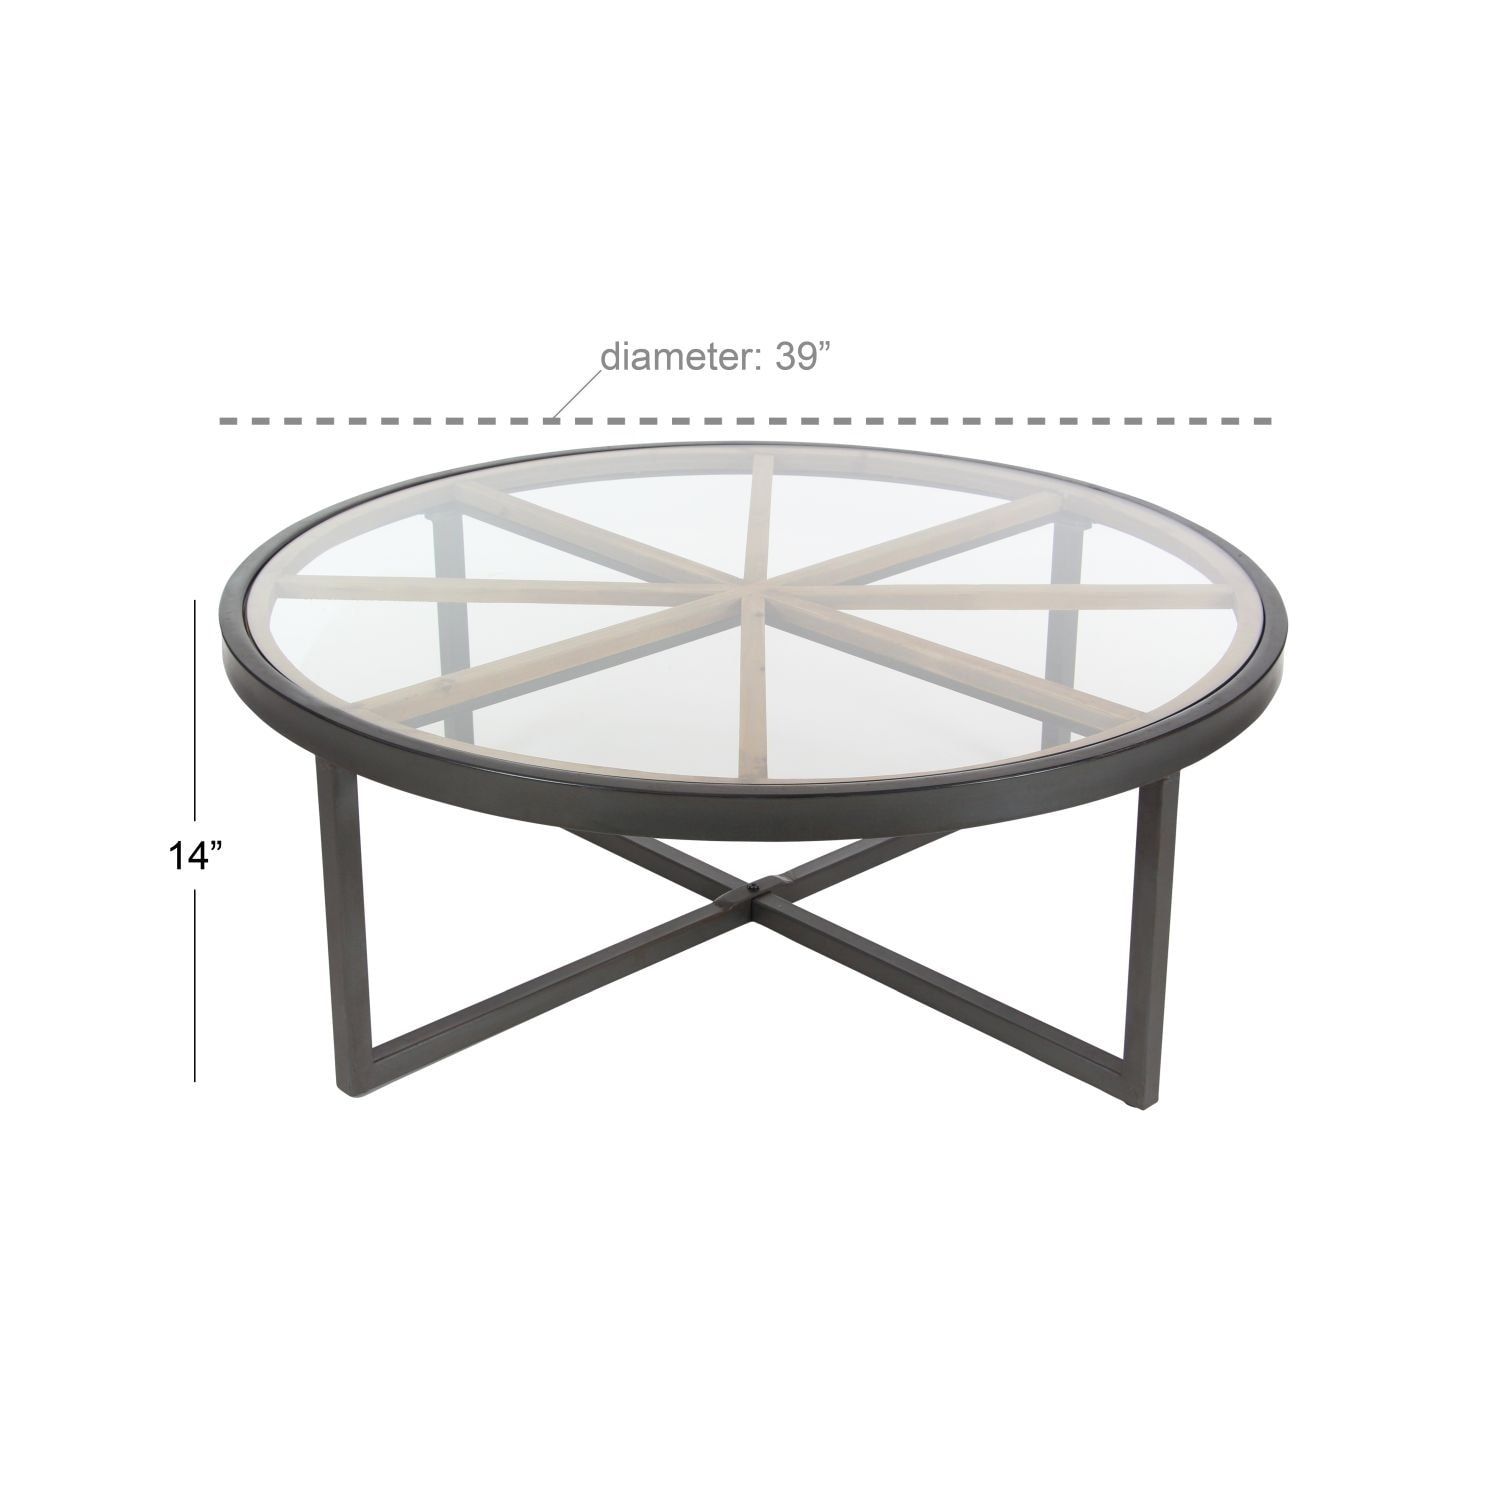 Studio 350 Metal Glass Wood Coffee Table 39 Inches Wide, 14 Inches High –  Bed Bath & Beyond – 17240699 Throughout Studio 350 Black Metal Coffee Tables (View 15 of 15)